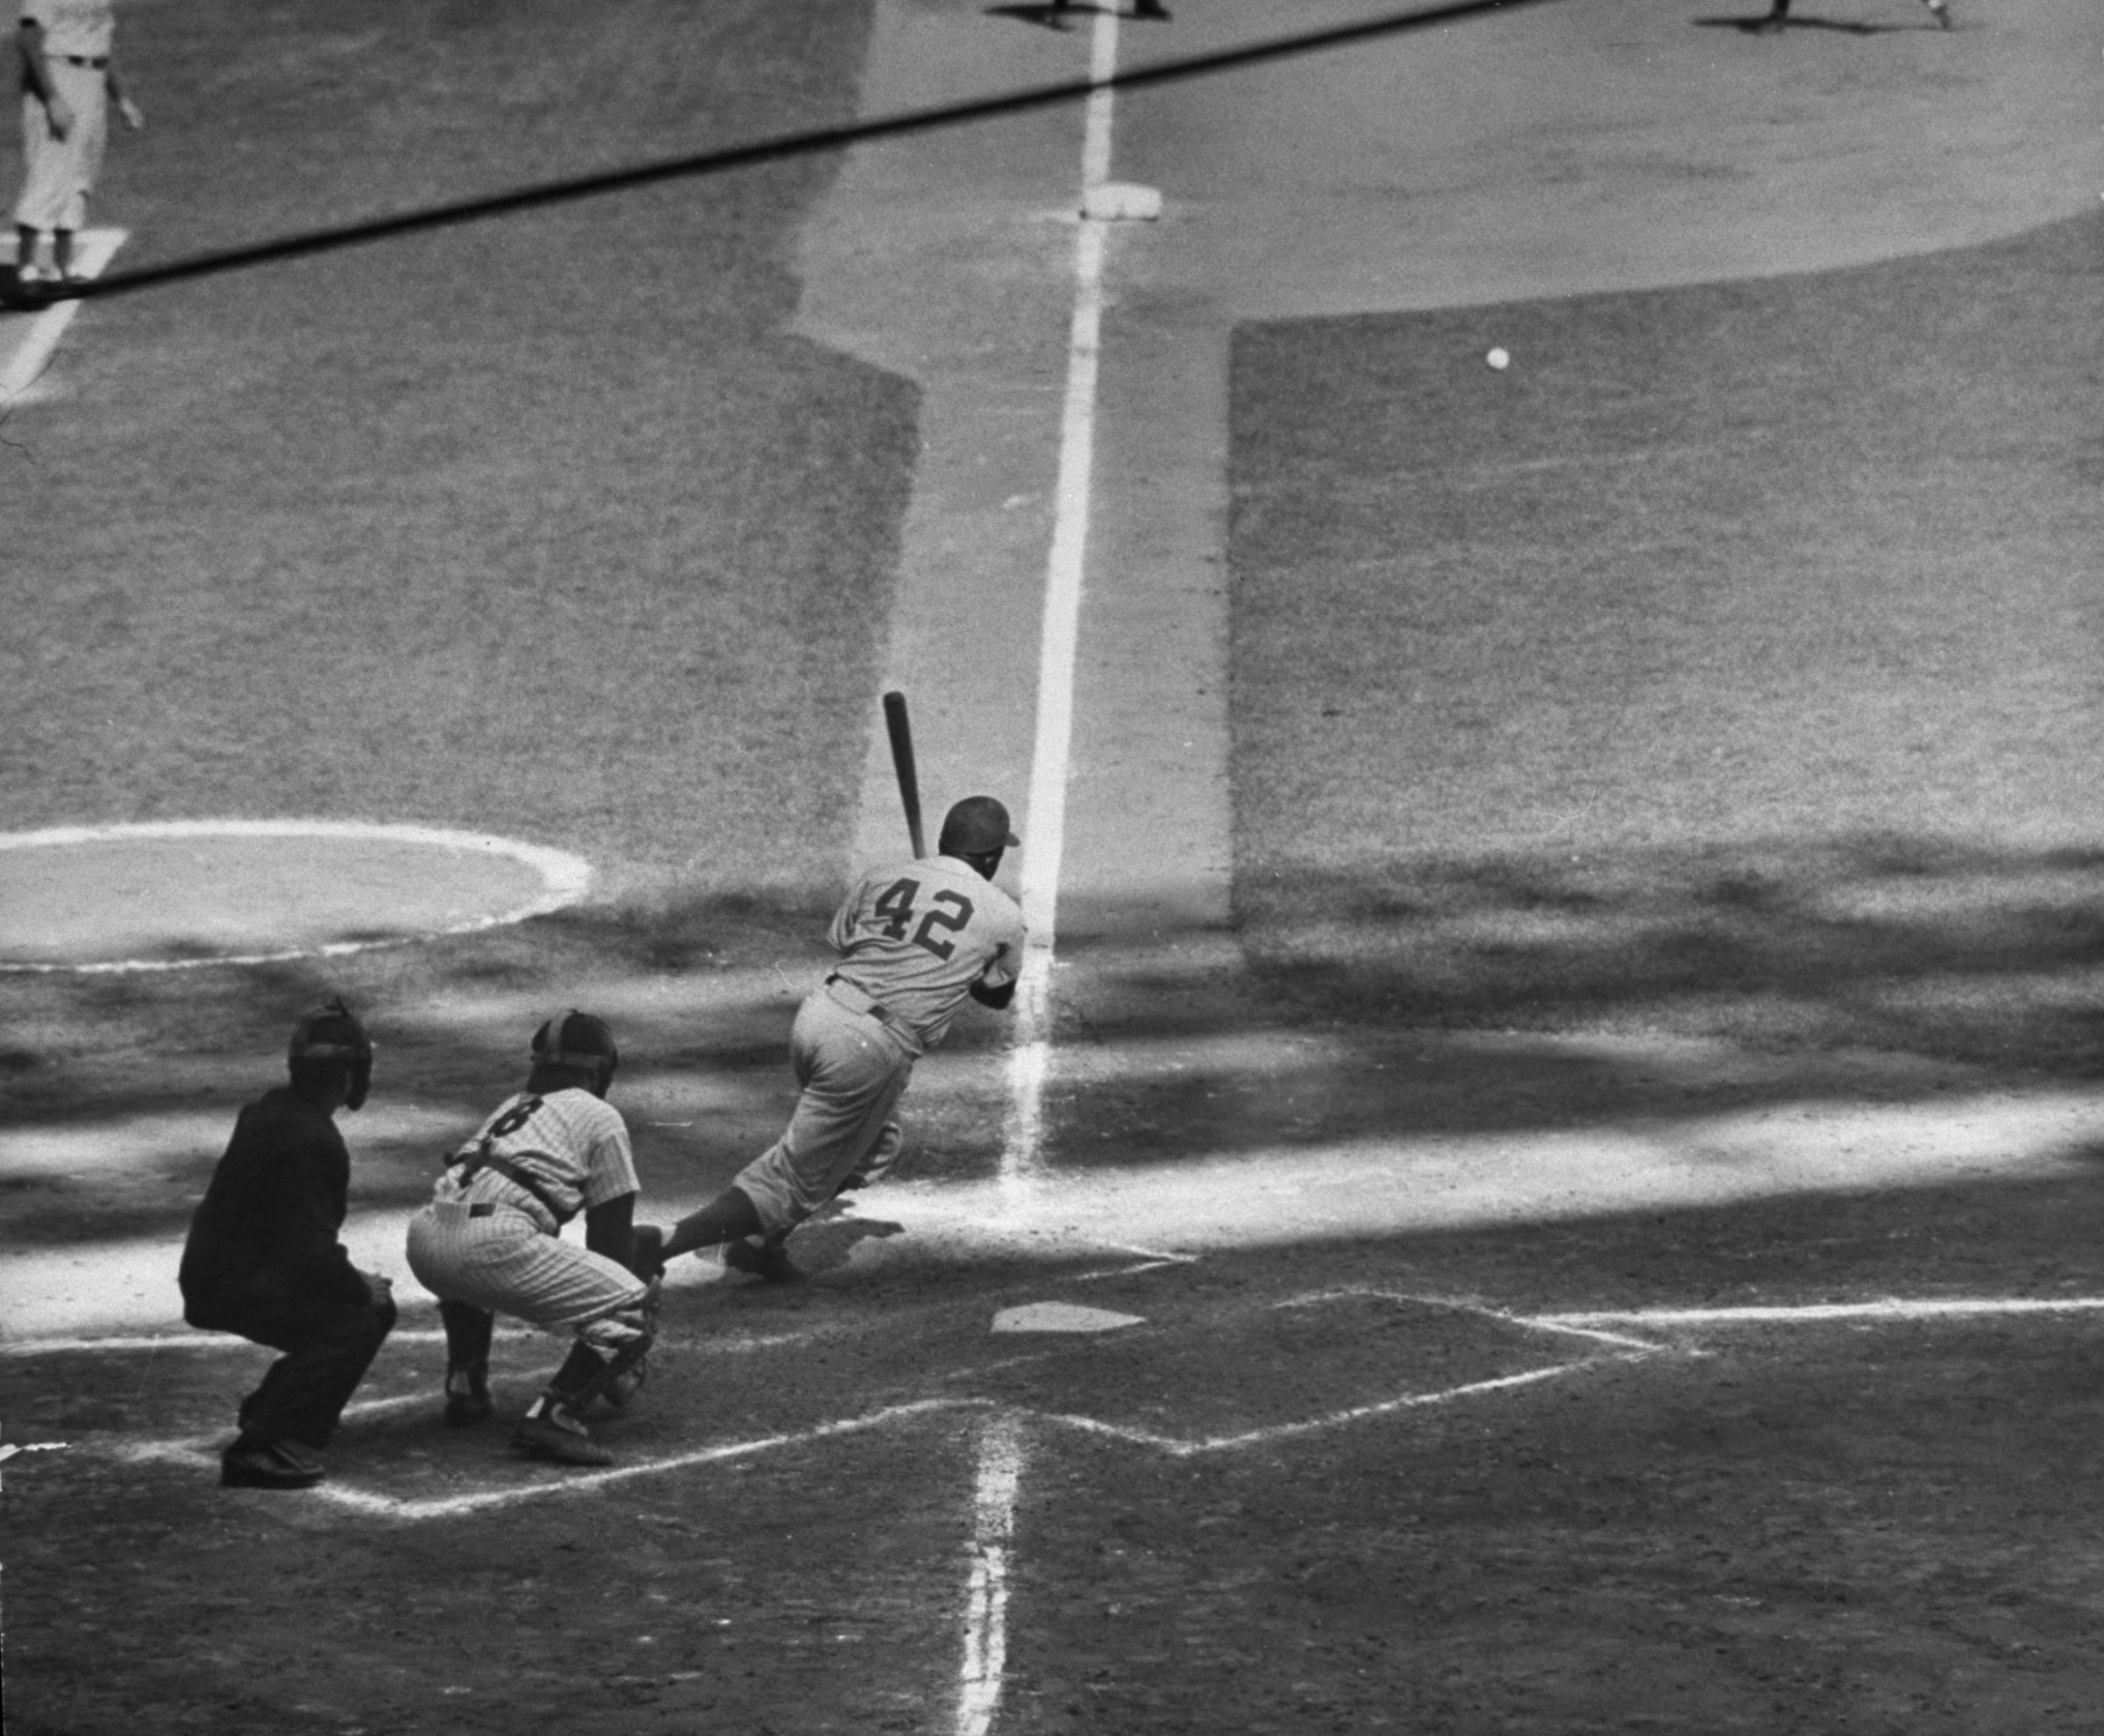 Jackie Robinson slashes a base hit during Game 6 of the 1955 World Series.